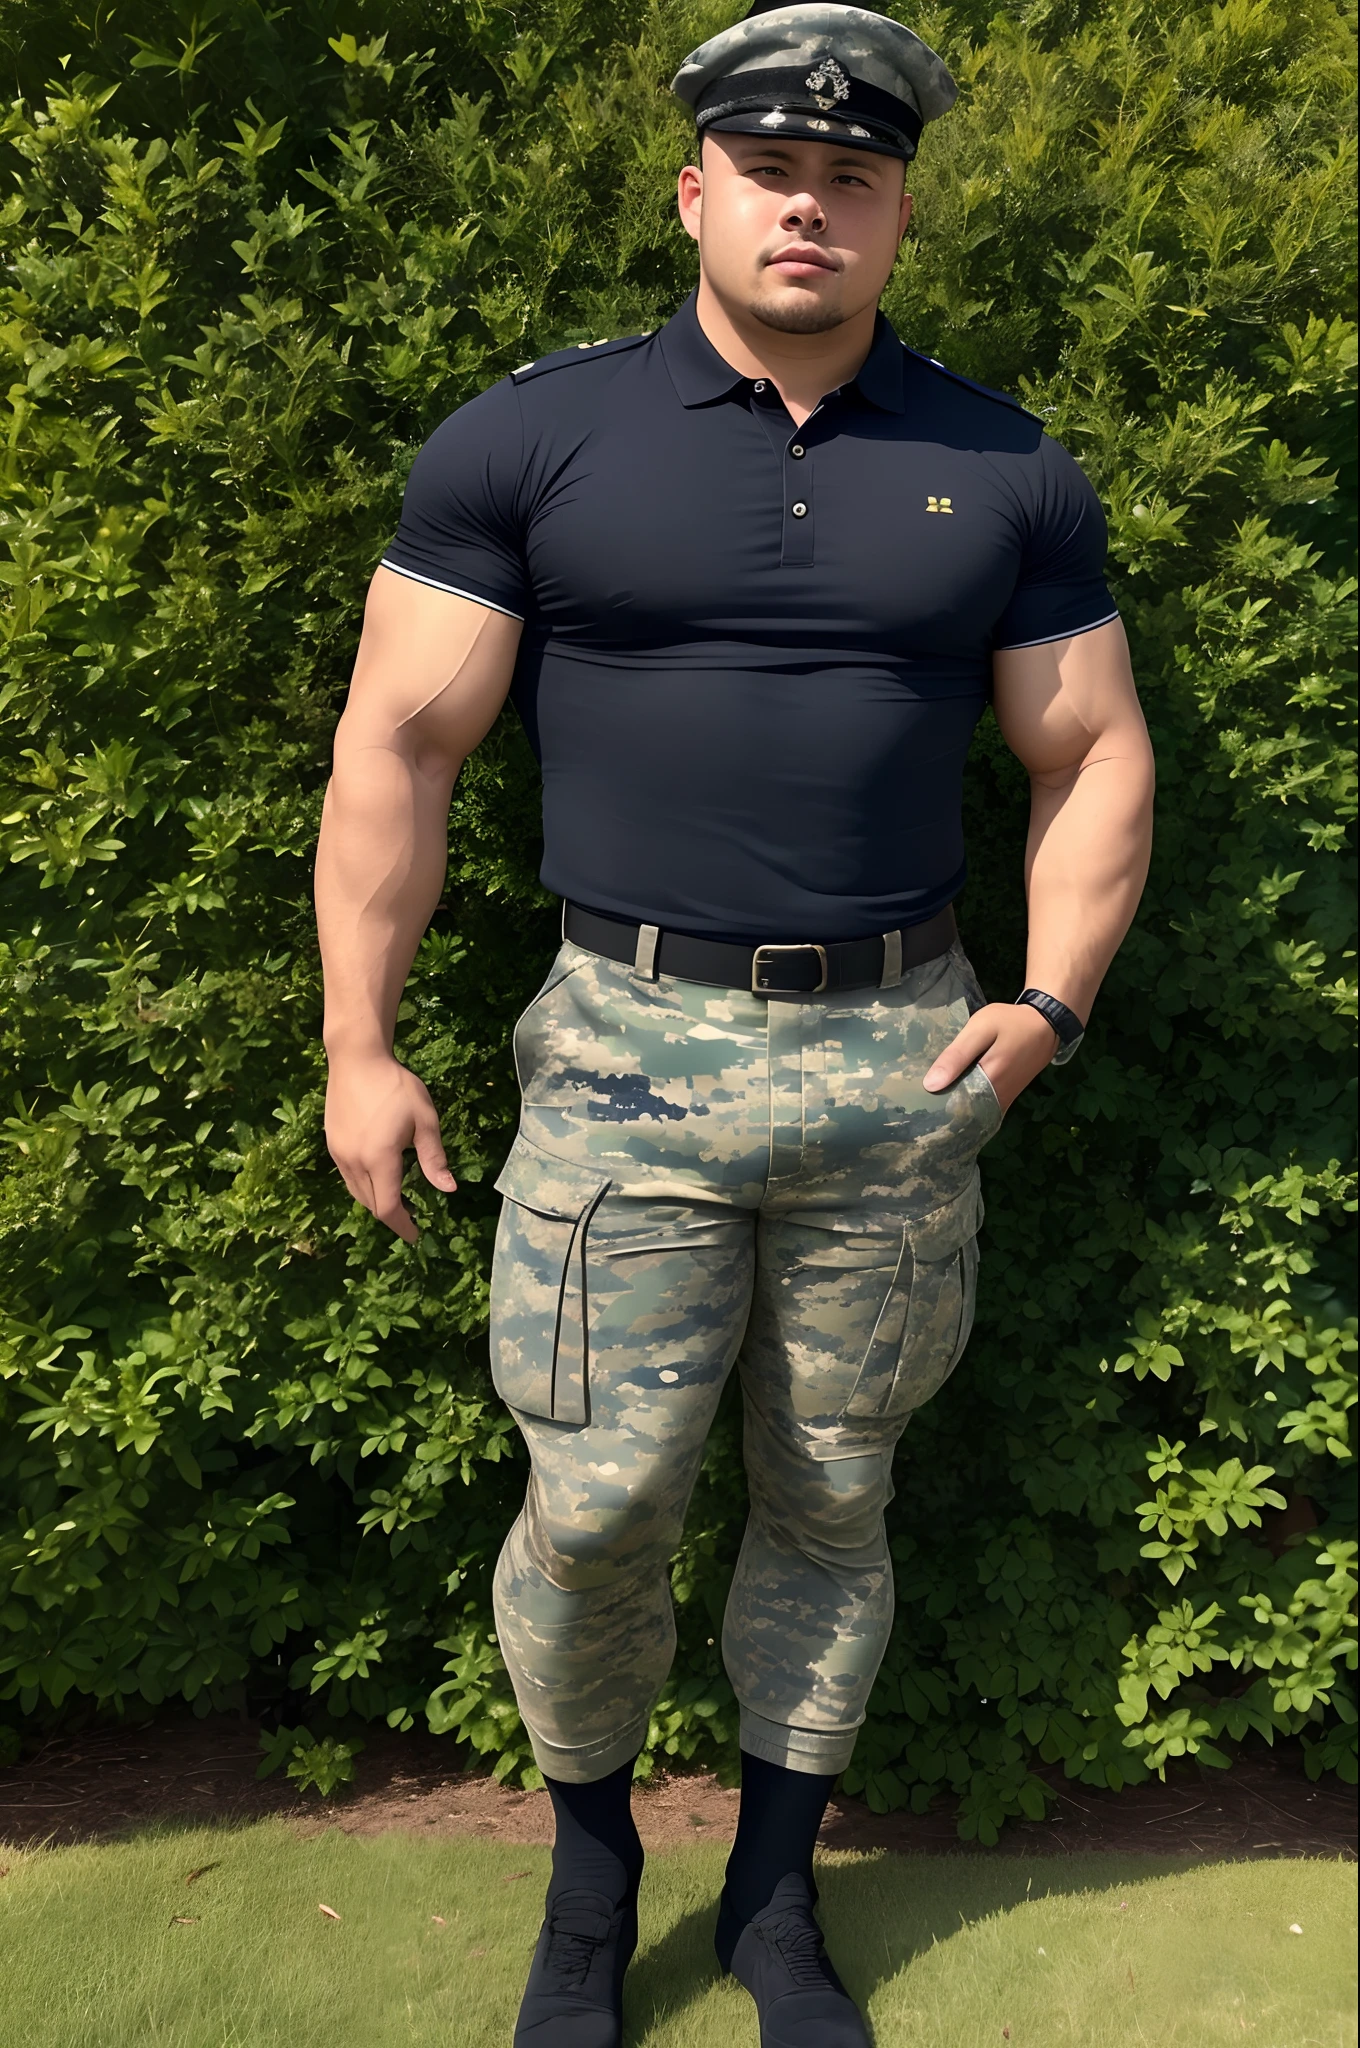 A man in military uniform（DARK OPEN POLO SHIRT，Camouflage pants），Height 195，Protruding lower body，Thick large muscles，Black socks